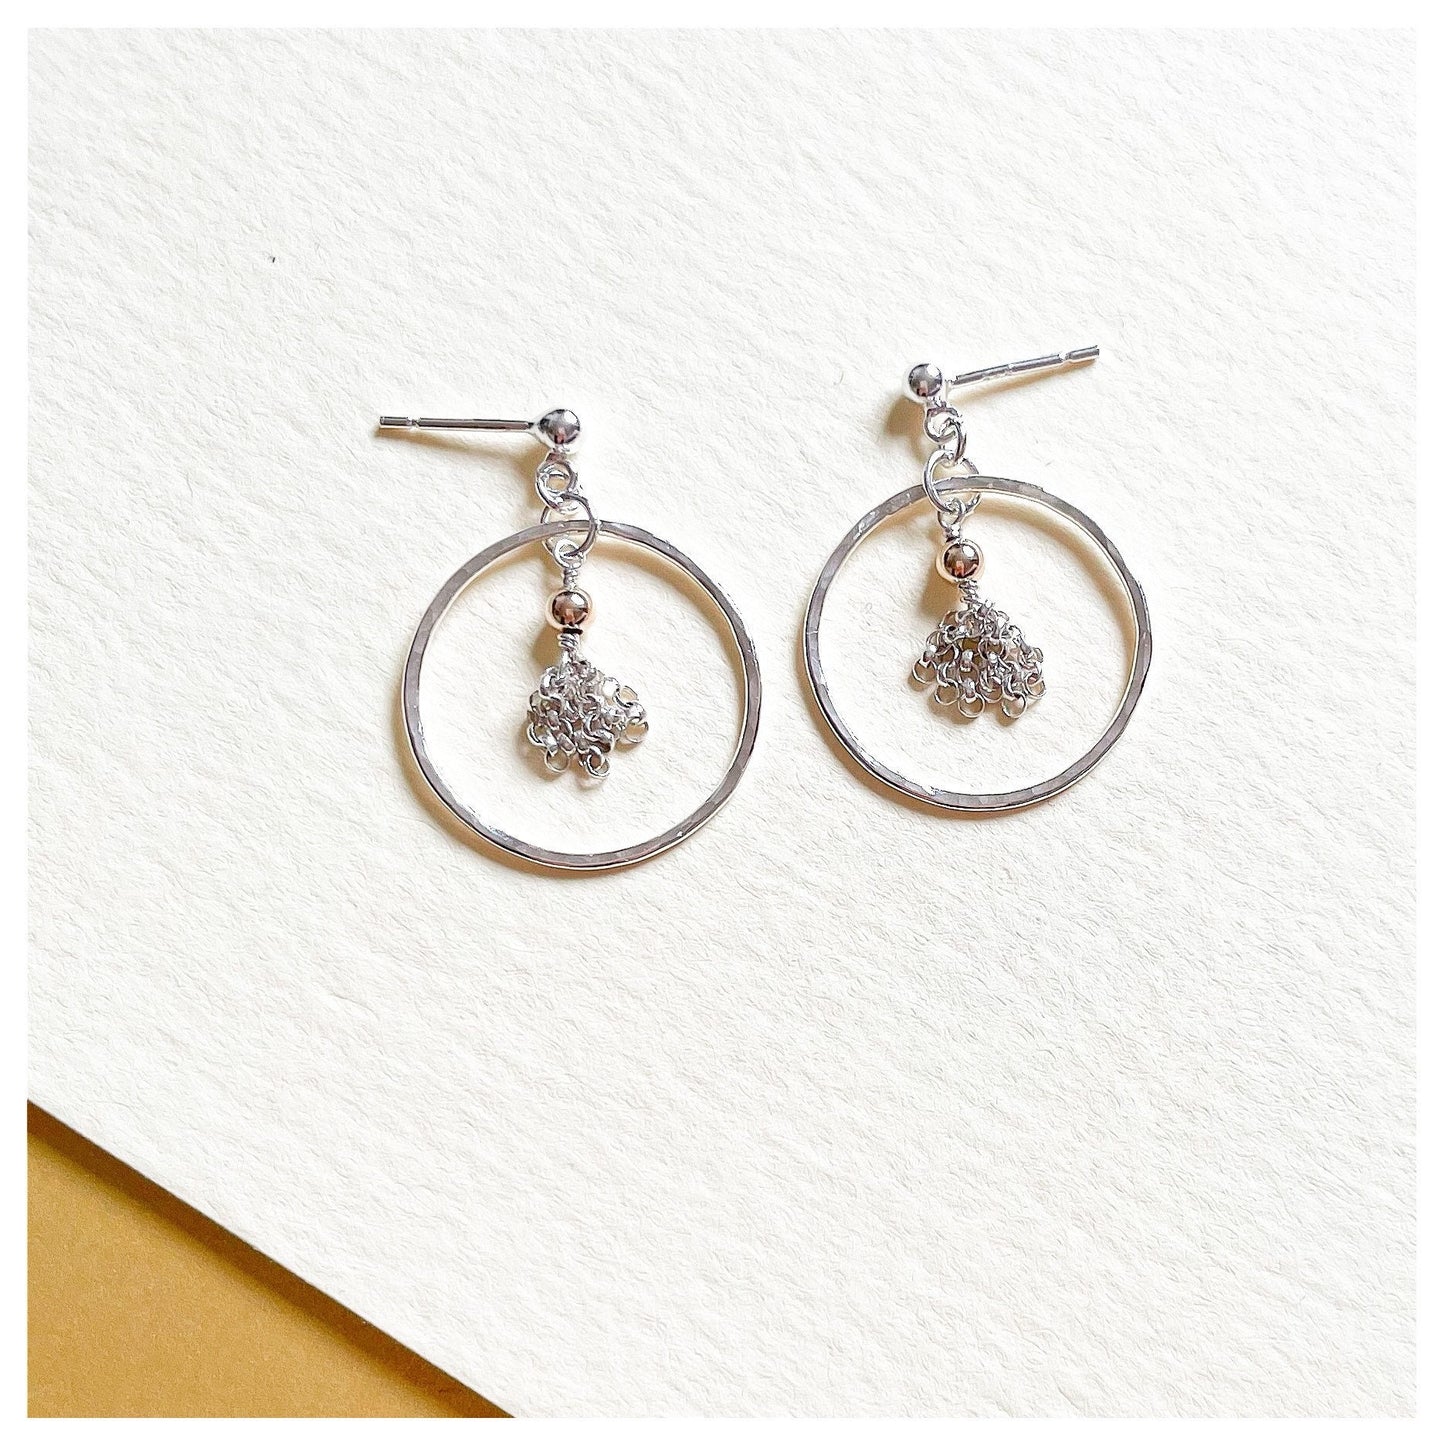 Sterling Silver and 9ct Gold Hammered Circle, Small Tassel Drop Stud earrings.